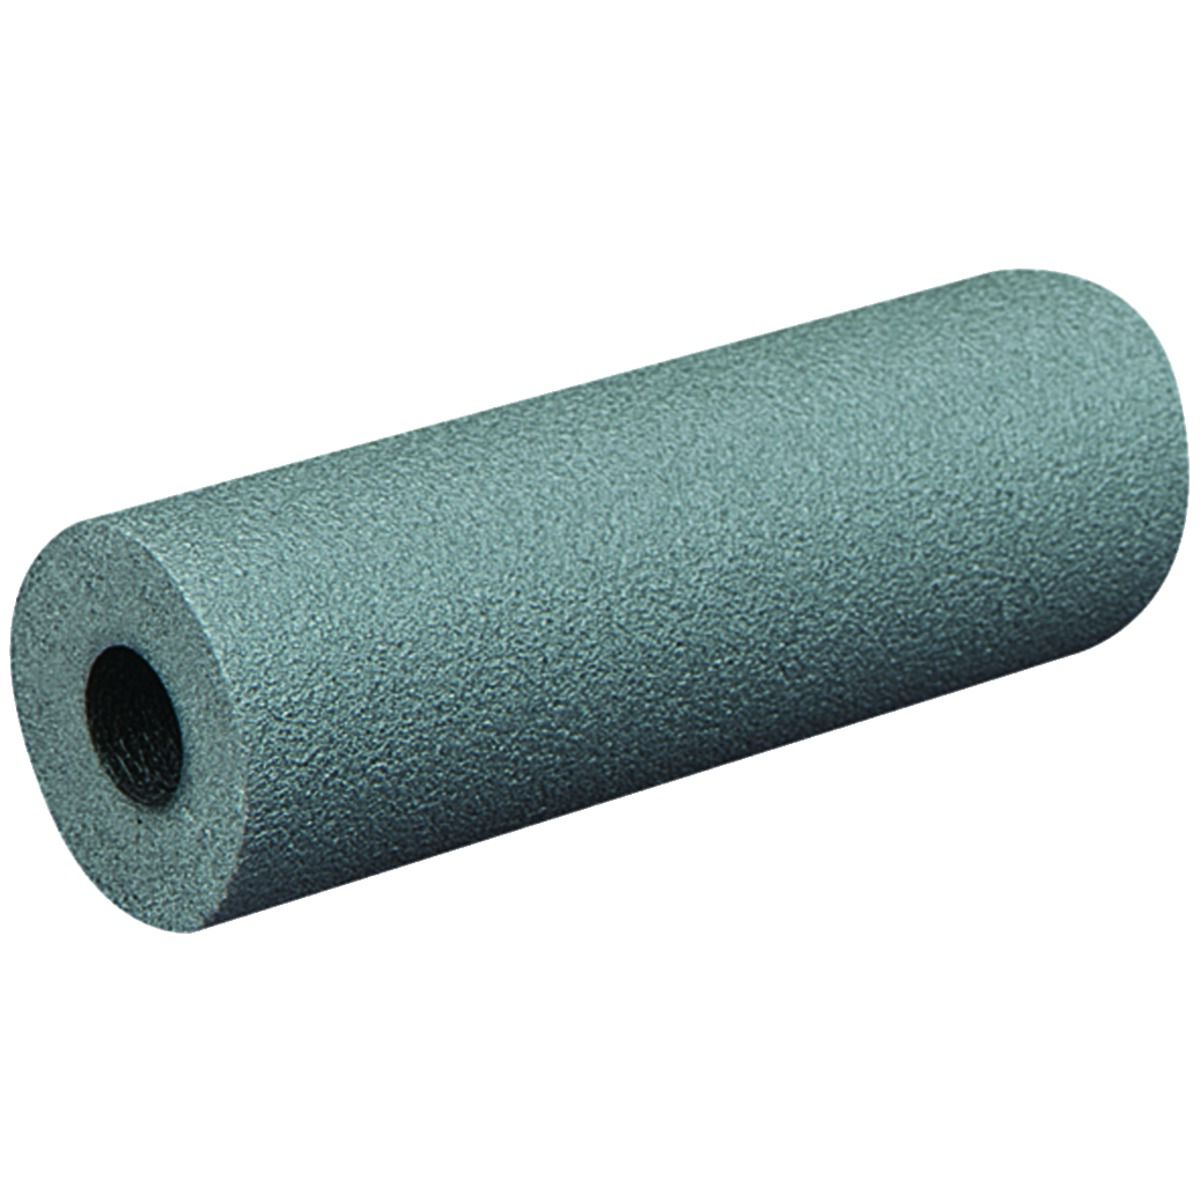 Image of Wickes Pipe Insulation Byelaw 22 x 1000mm Pack 3